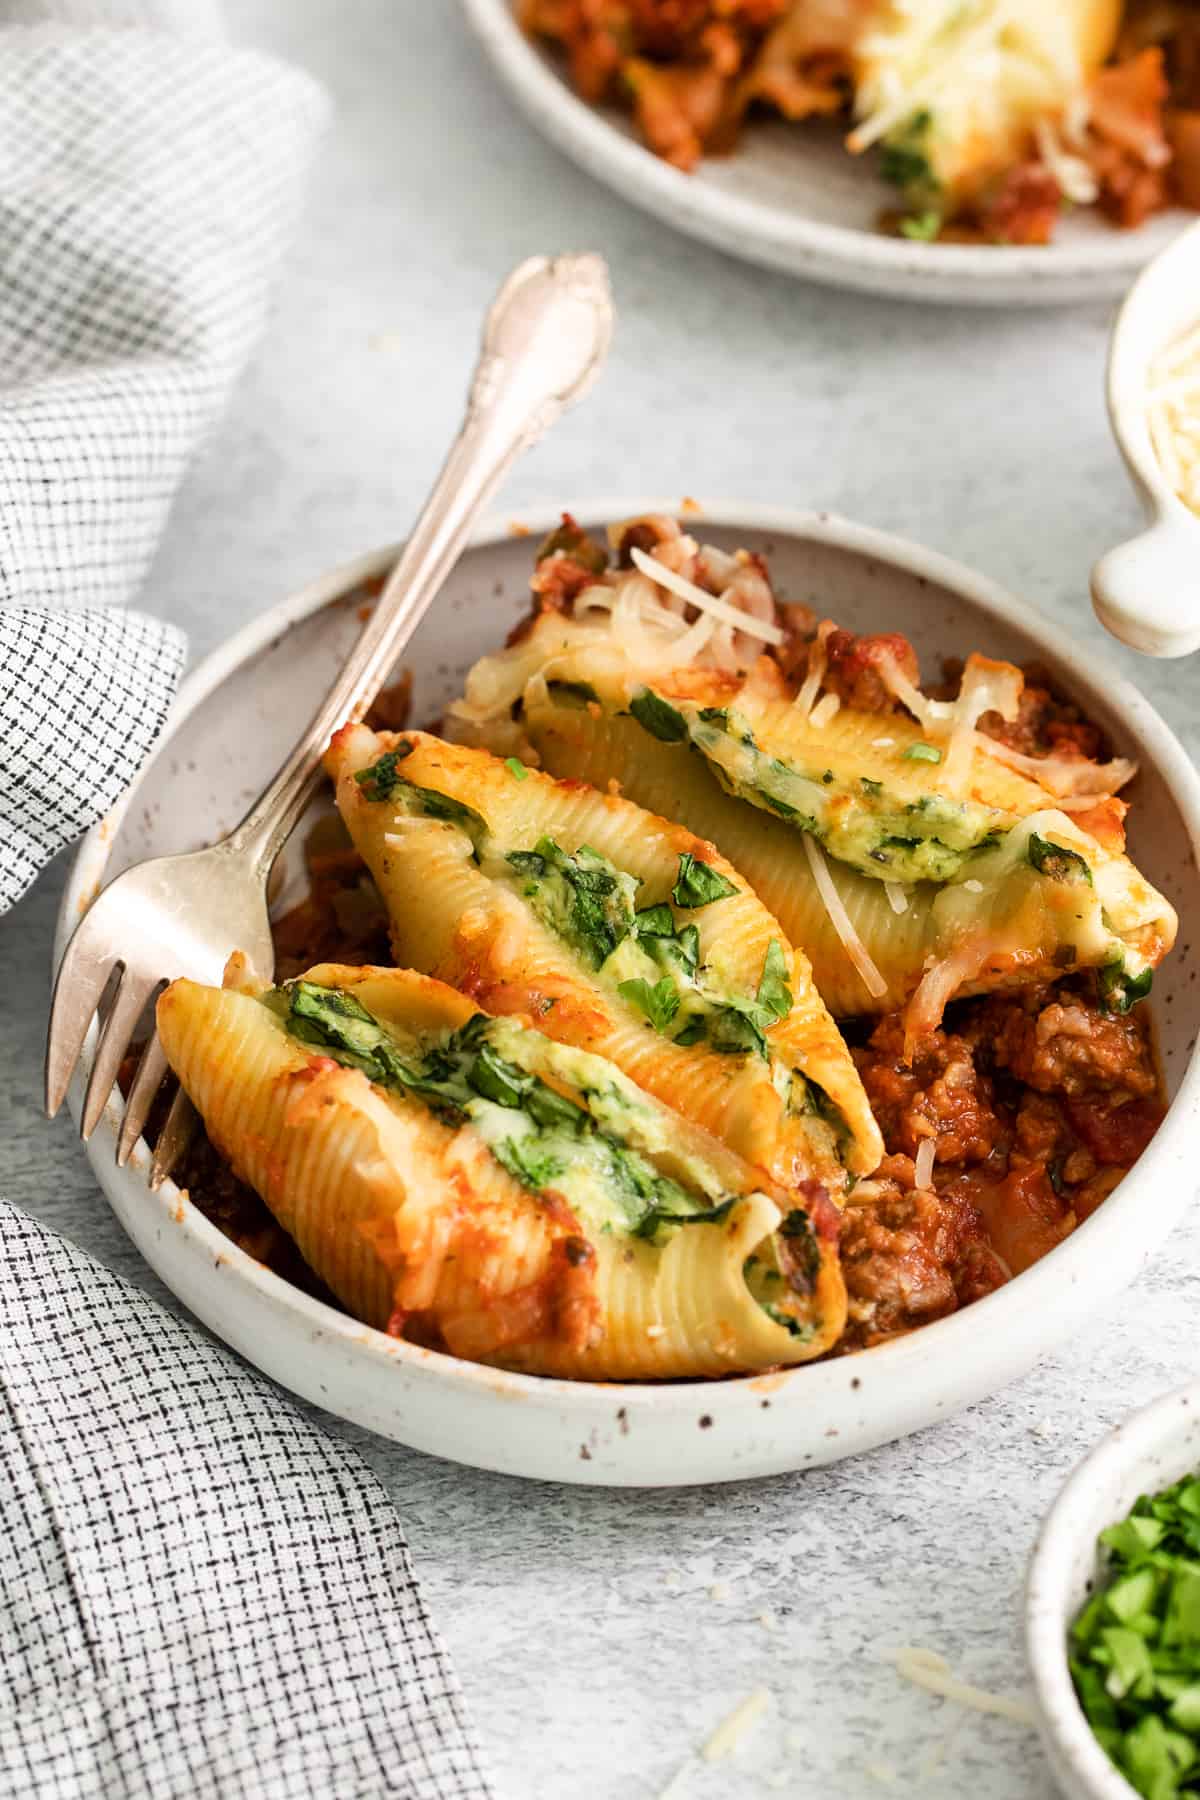 Stuffed shells with meat sauce on a plate.